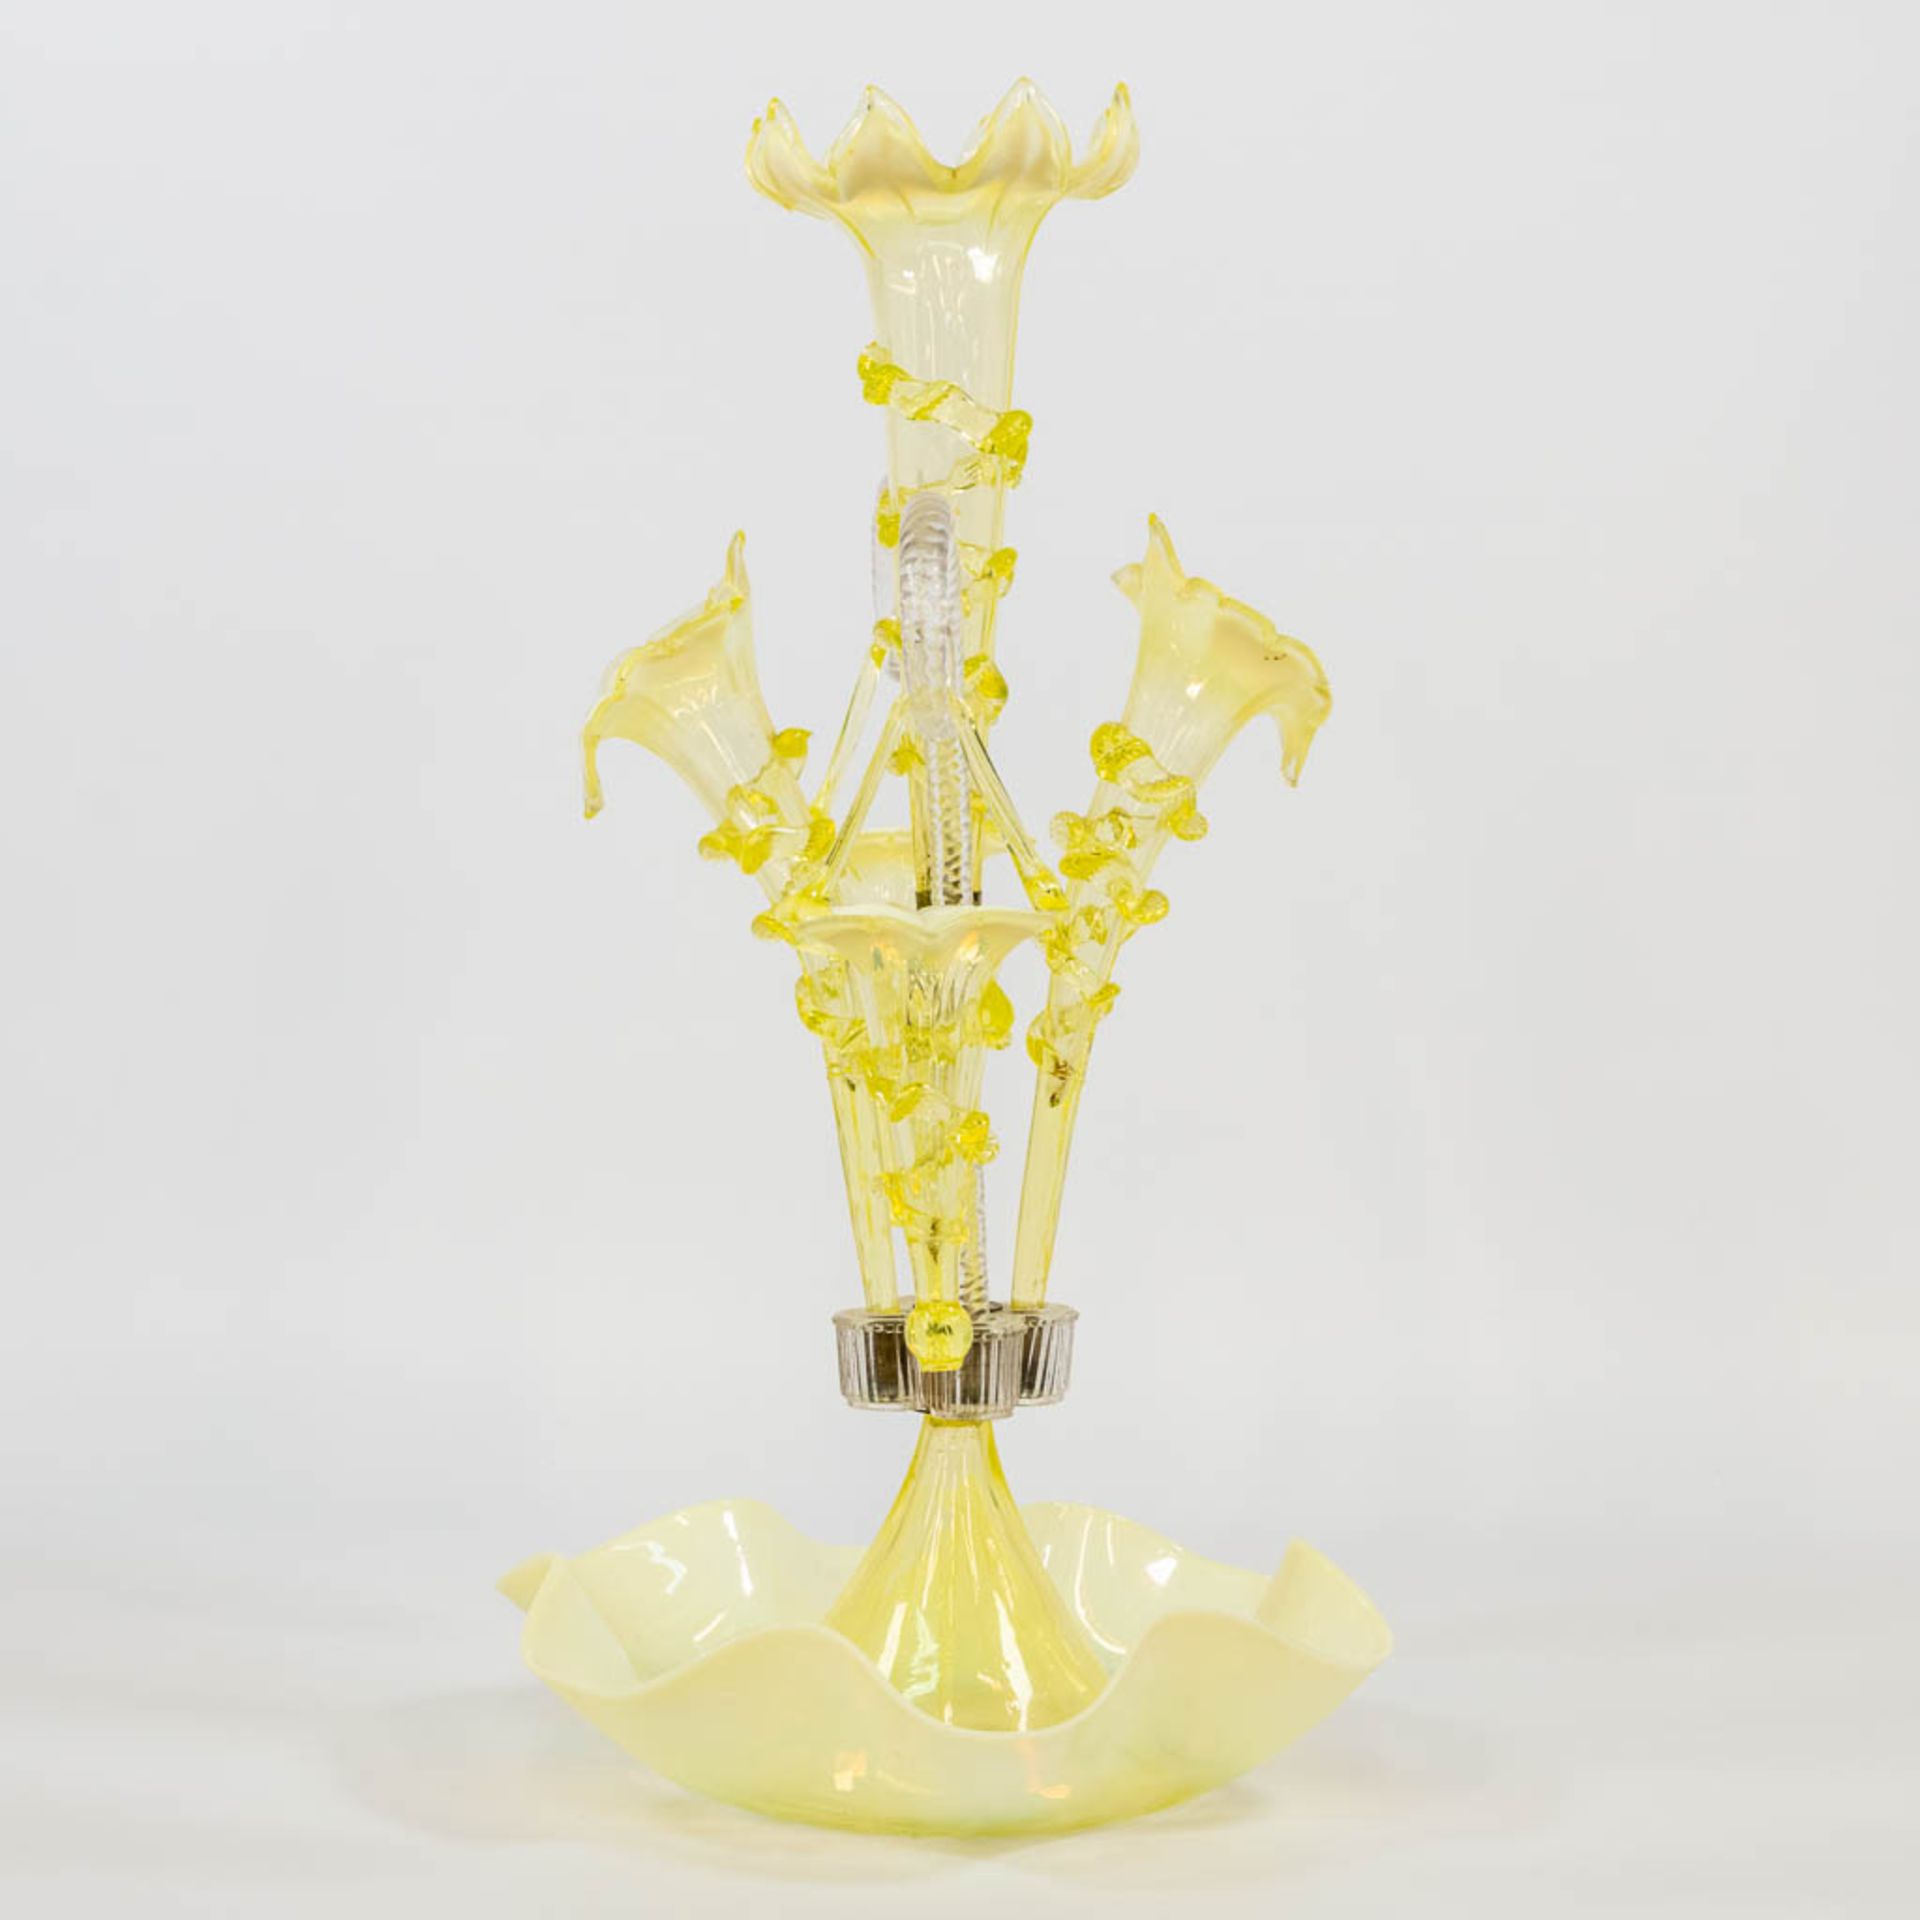 A yellow and clear glass table centrepiece pic-fleur, made in Murano, Italy. (25 x 28 x 45 cm) - Bild 4 aus 15